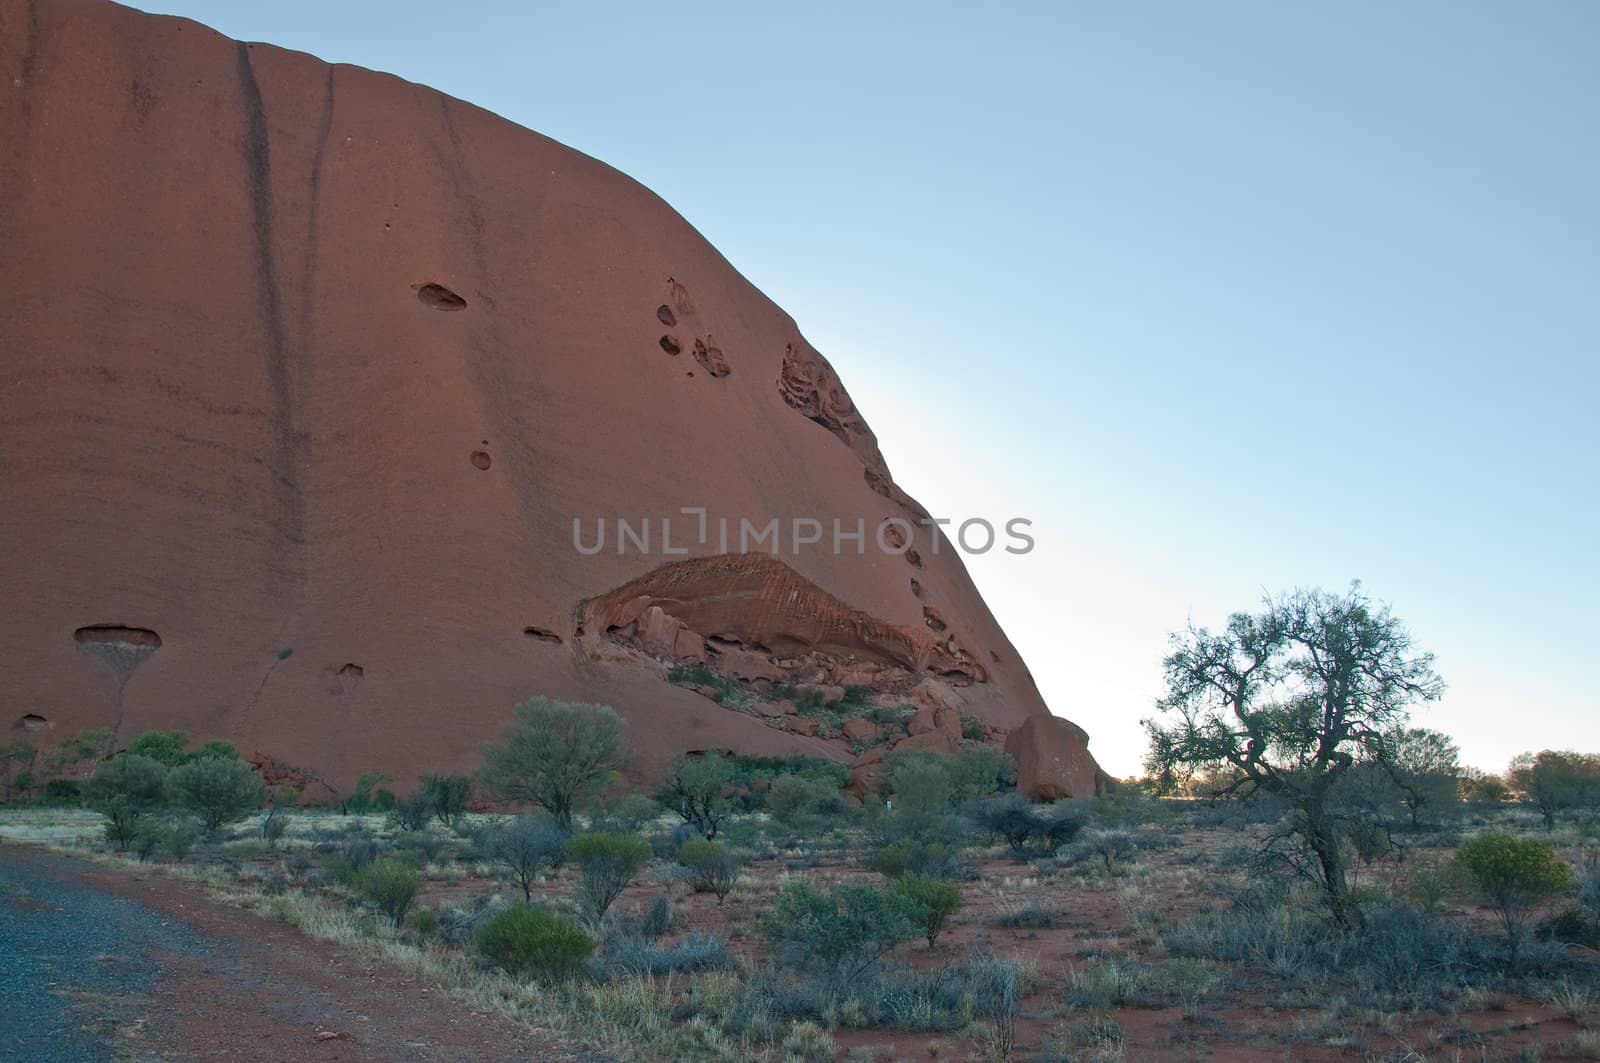 view of Ayers Rock, outback australia Northern Territory